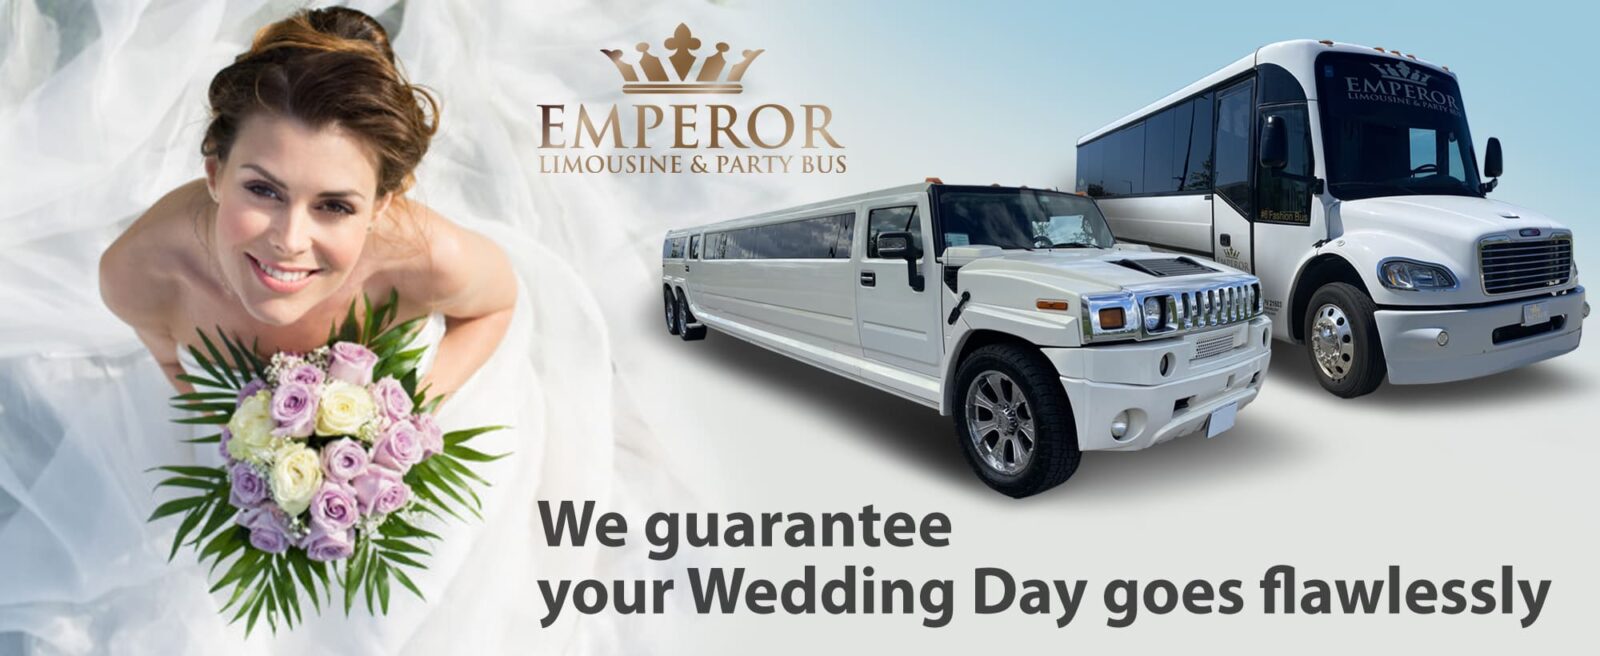 Who Can Provide a Wedding Limo in Chicago?